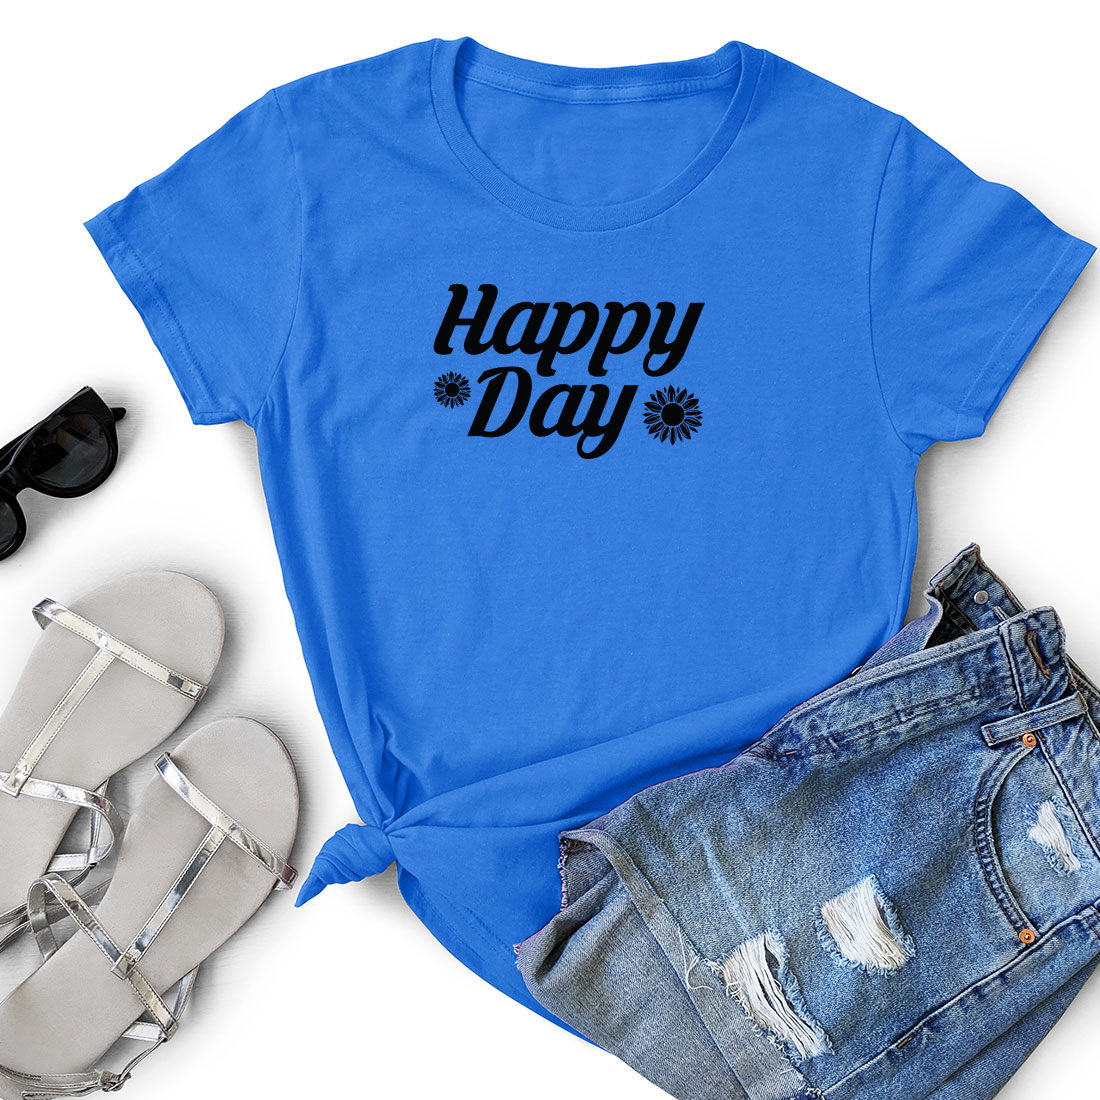 T - shirt that says happy day next to a pair of shorts.